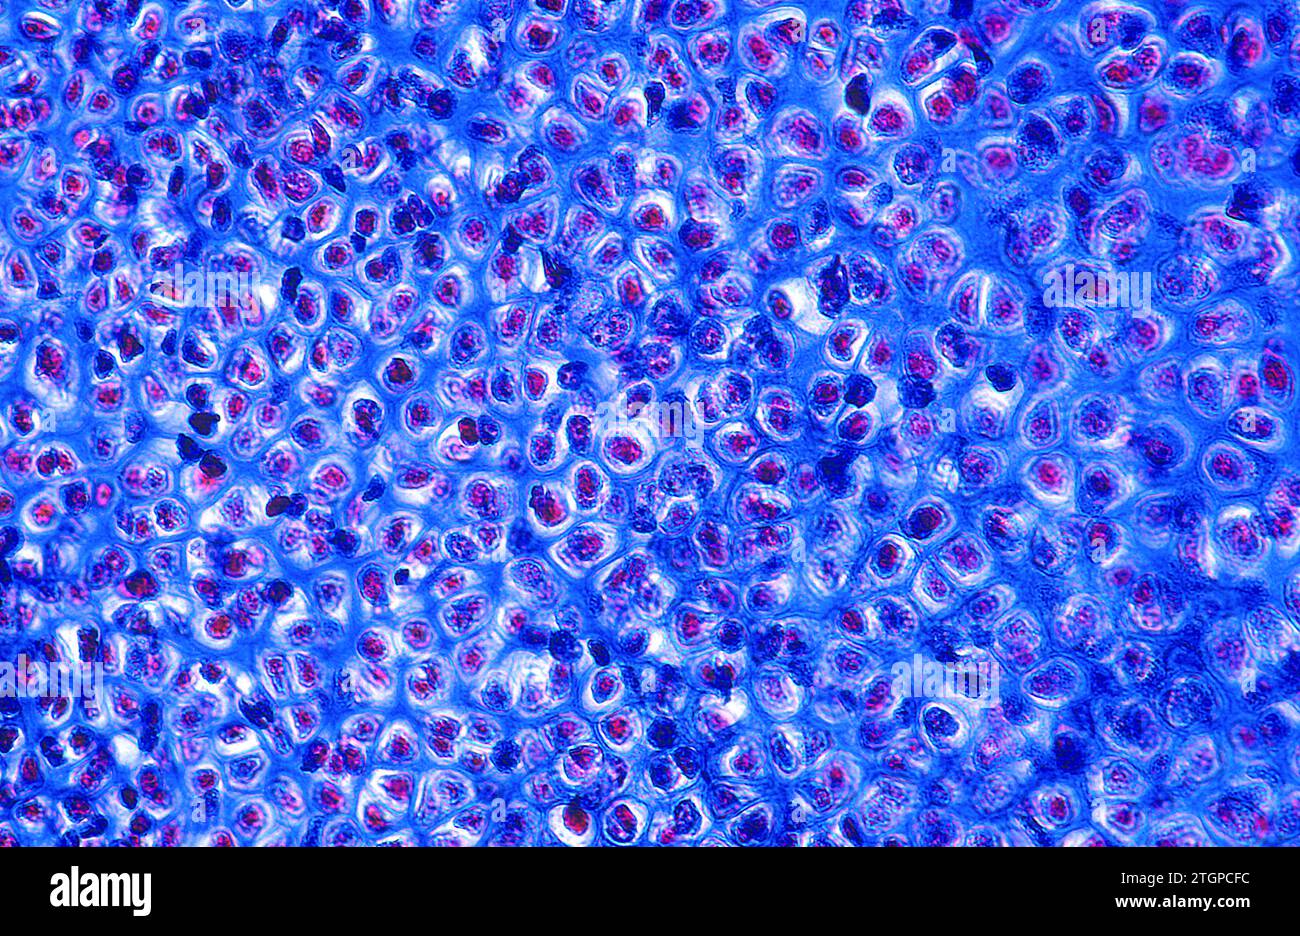 Hyaline cartilage is a kind of cartilage tissue. Photomicrograph. Stock Photo